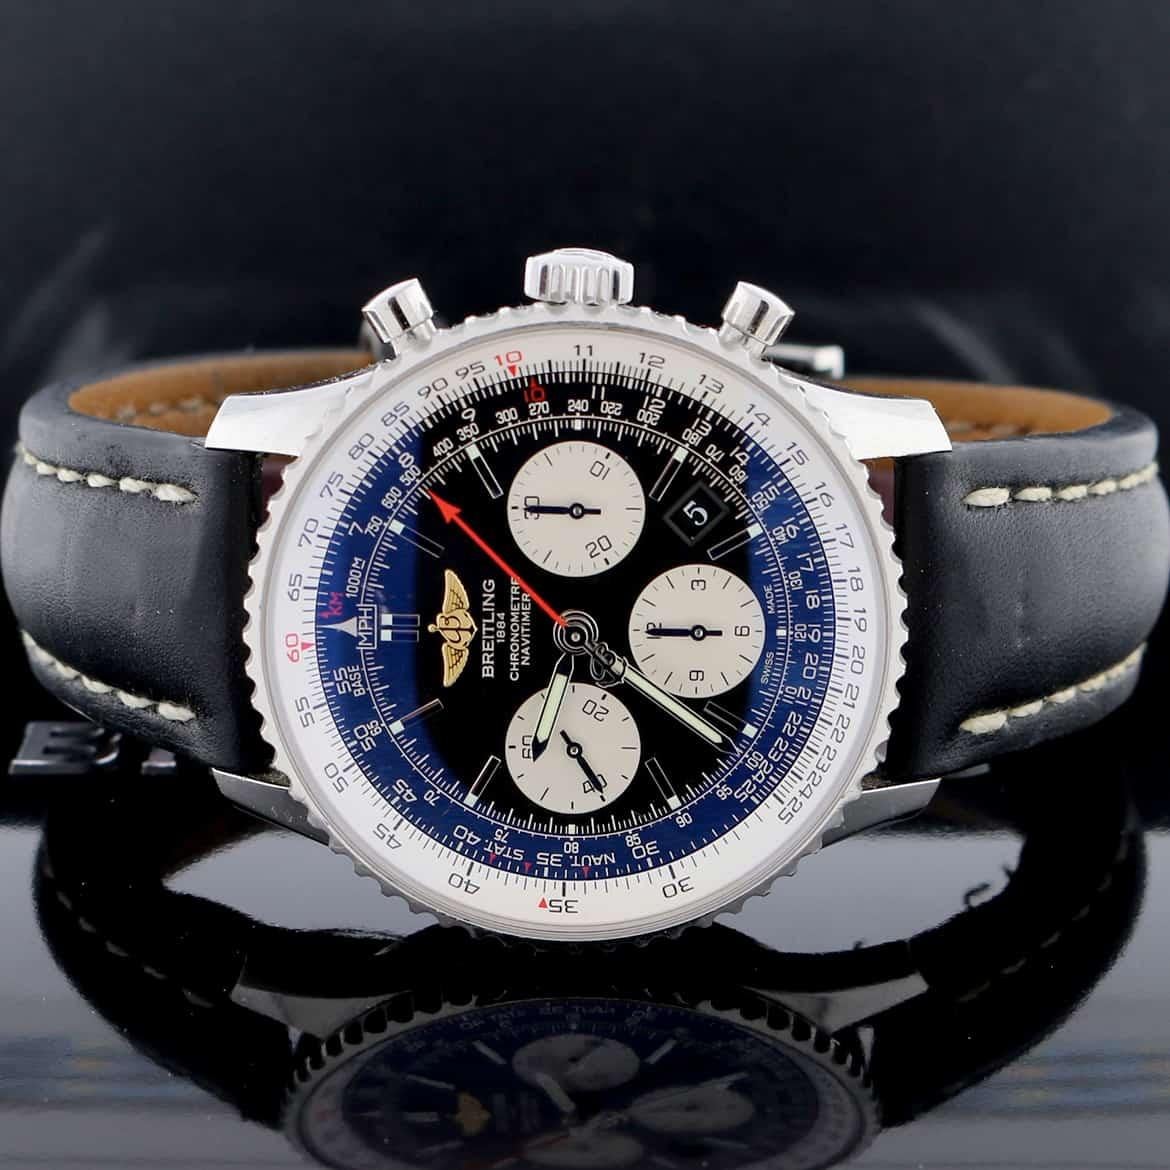 Breitling Navitimer 01 Chronograph 43MM Black Dial Automatic Stainless Steel Mens Watch AB0120

Breitling Navitimer 01 Chronograph Automatic Stainless Steel Mens Watch, Ref# AB0120. Self-winding automatic movement. Stainless steel case 43mm in